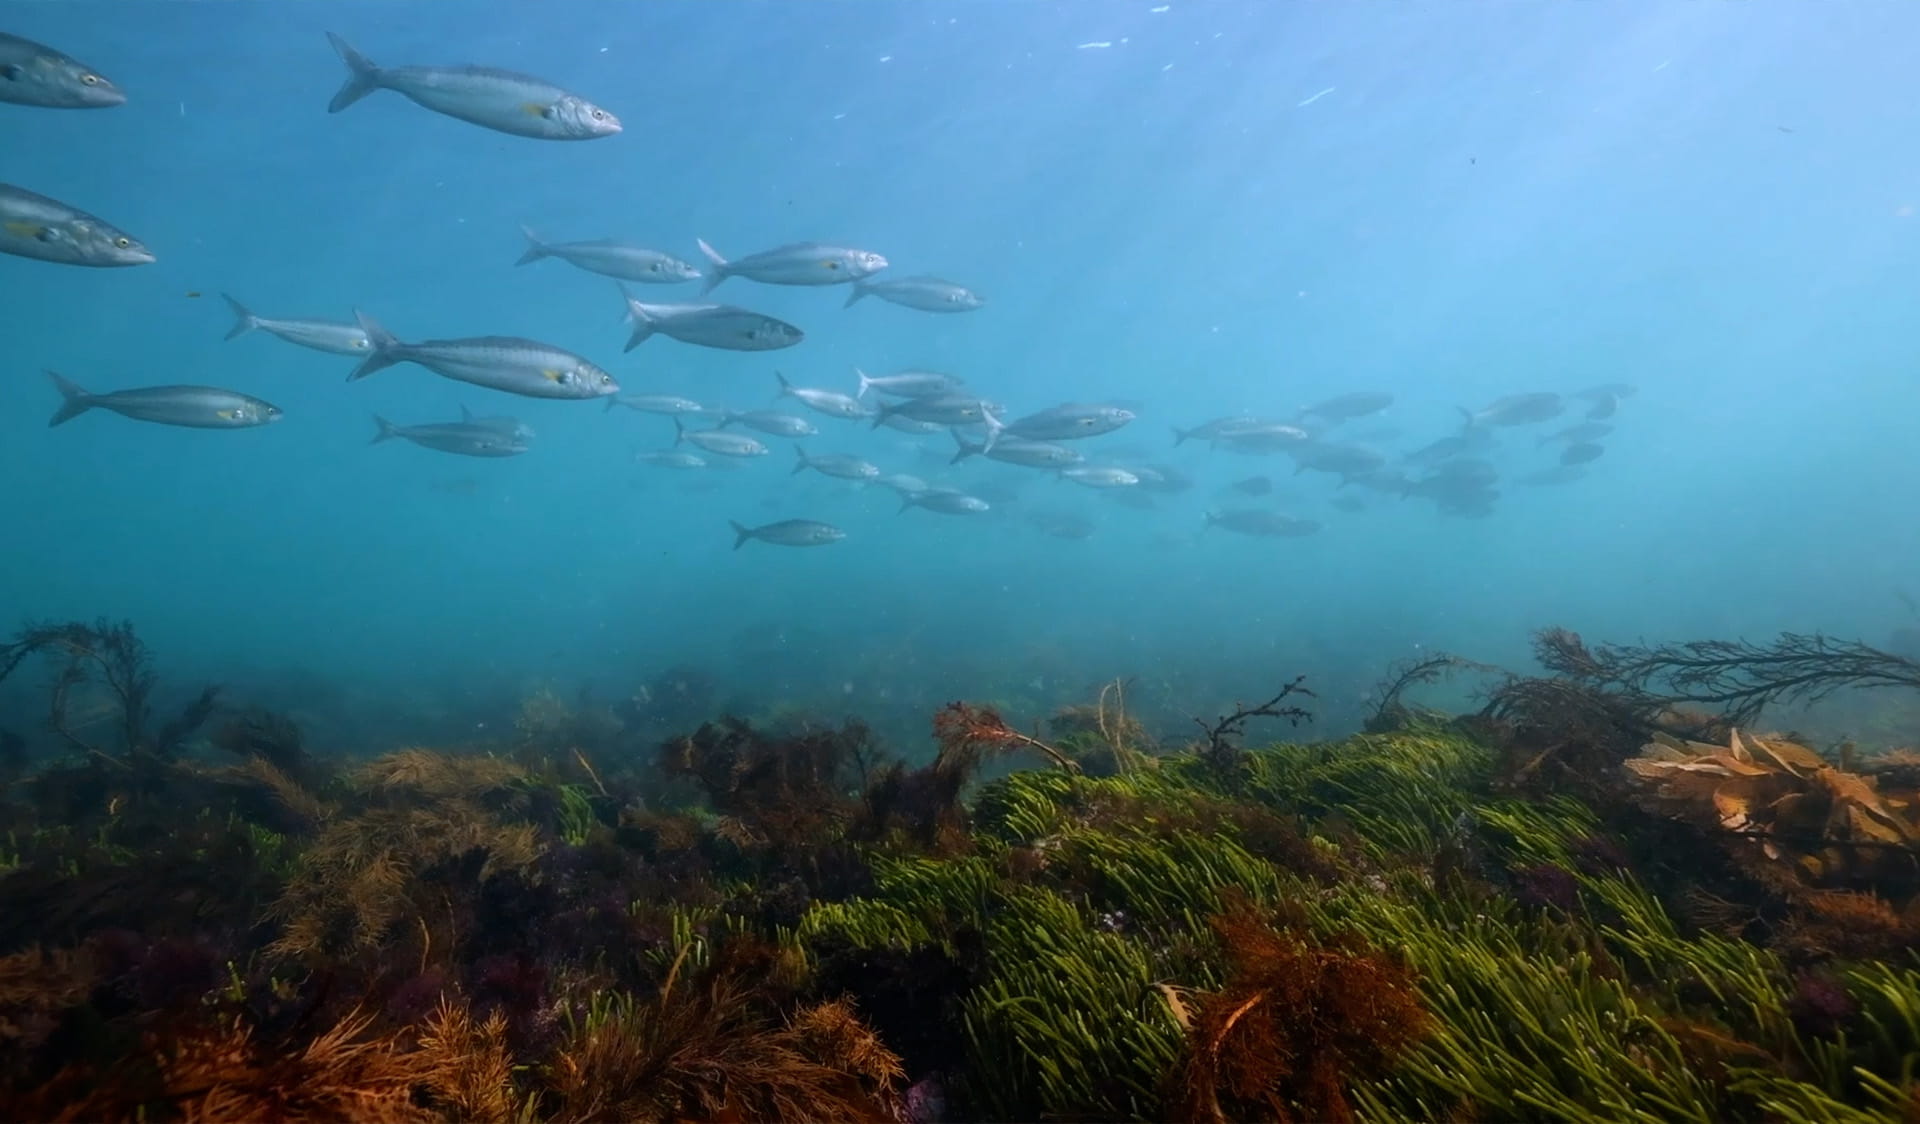 A school of silvery fish swim over a bed of kelp.